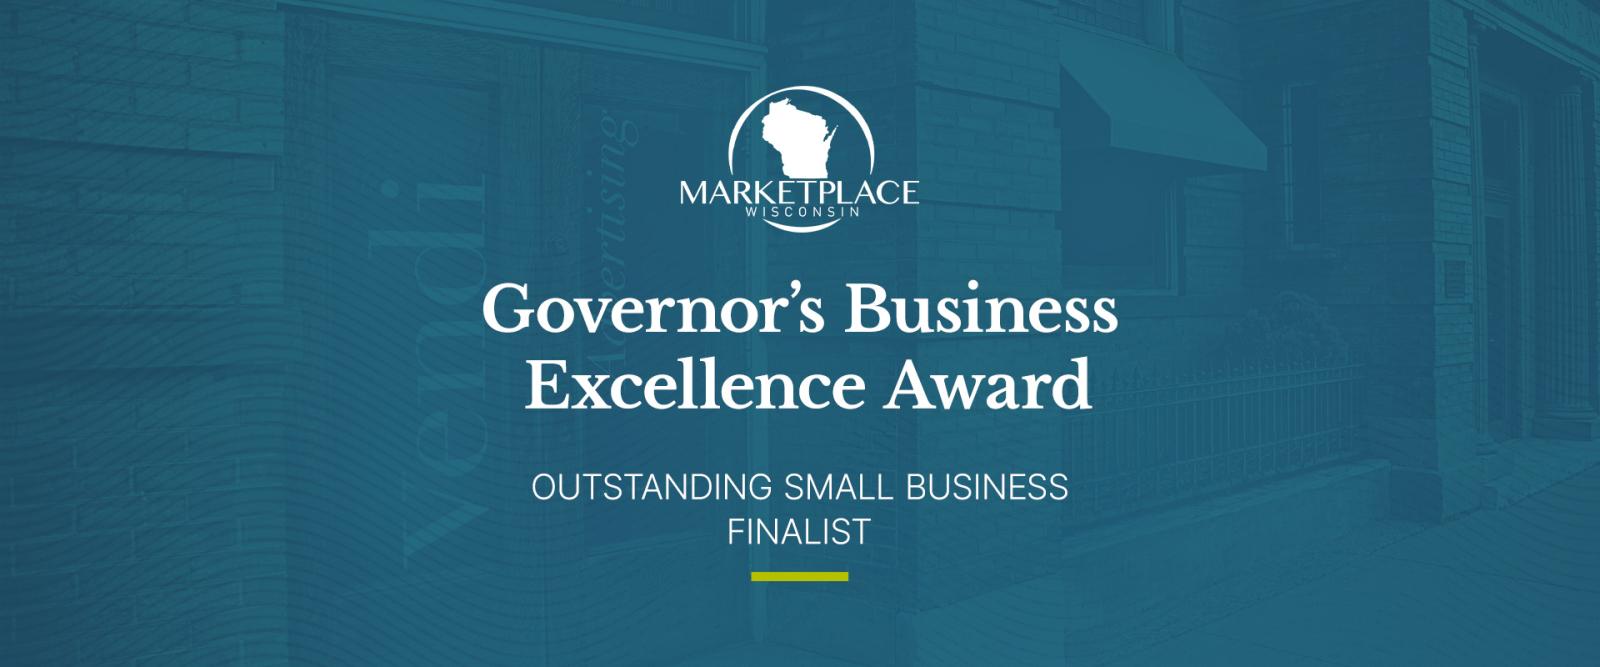 Governor's Business Excellence Award 